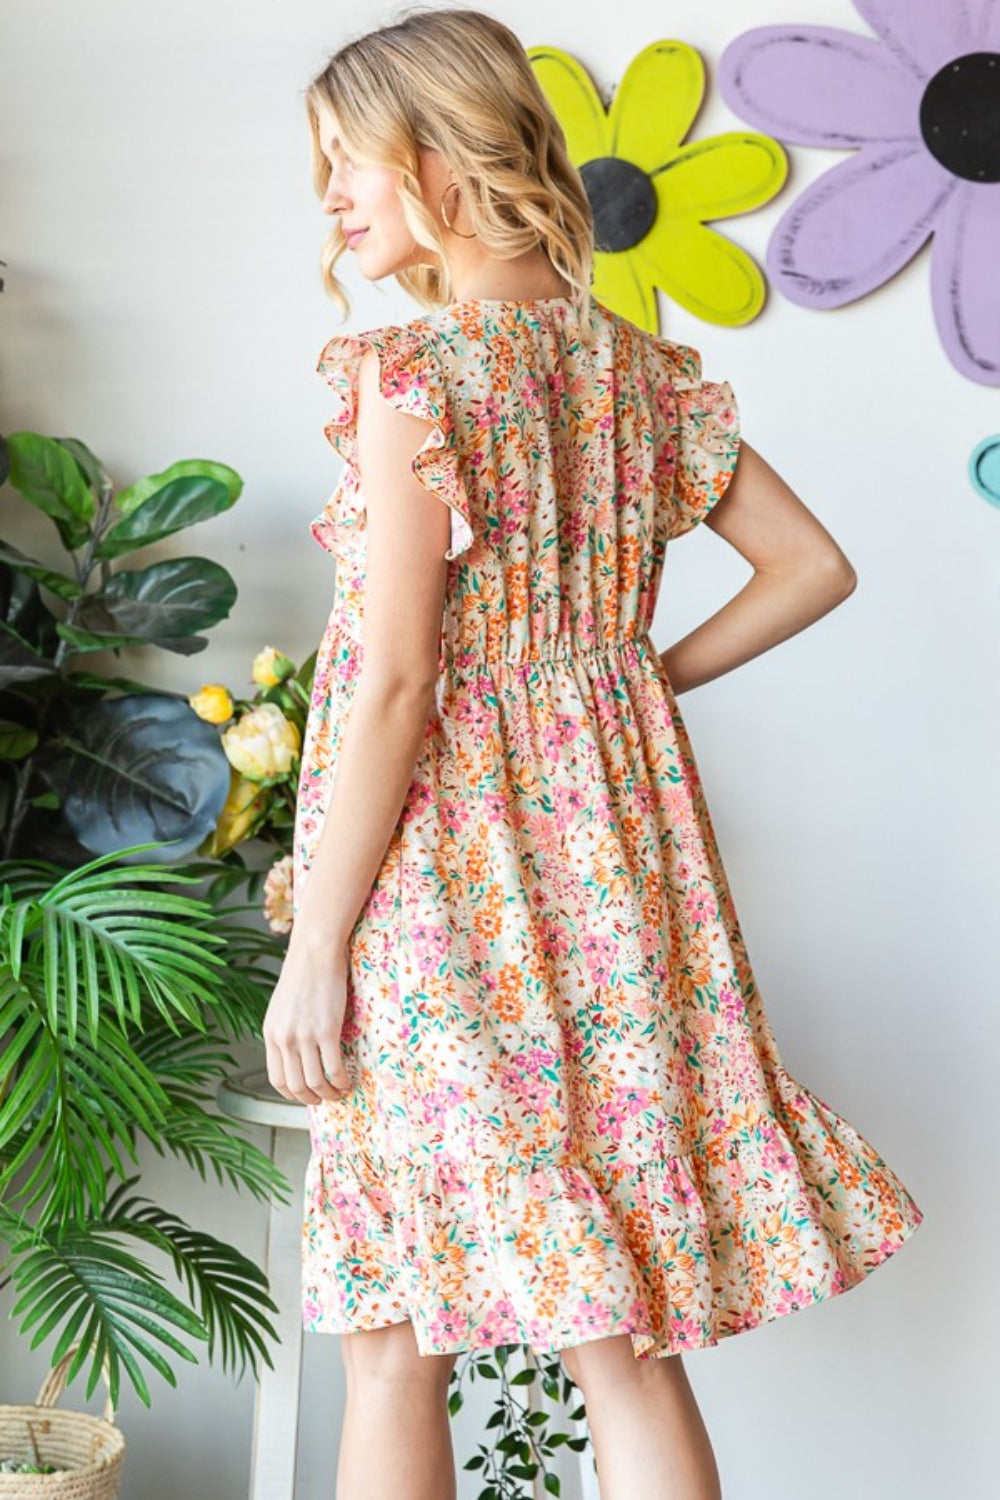 Introducing the Floral Ruffled V-Neck Dress. This stunning dress combines feminine elegance with a touch of playfulness. The floral pattern adds a romantic and vibrant flair, while the ruffled details create a whimsical and graceful look. S  - 3X